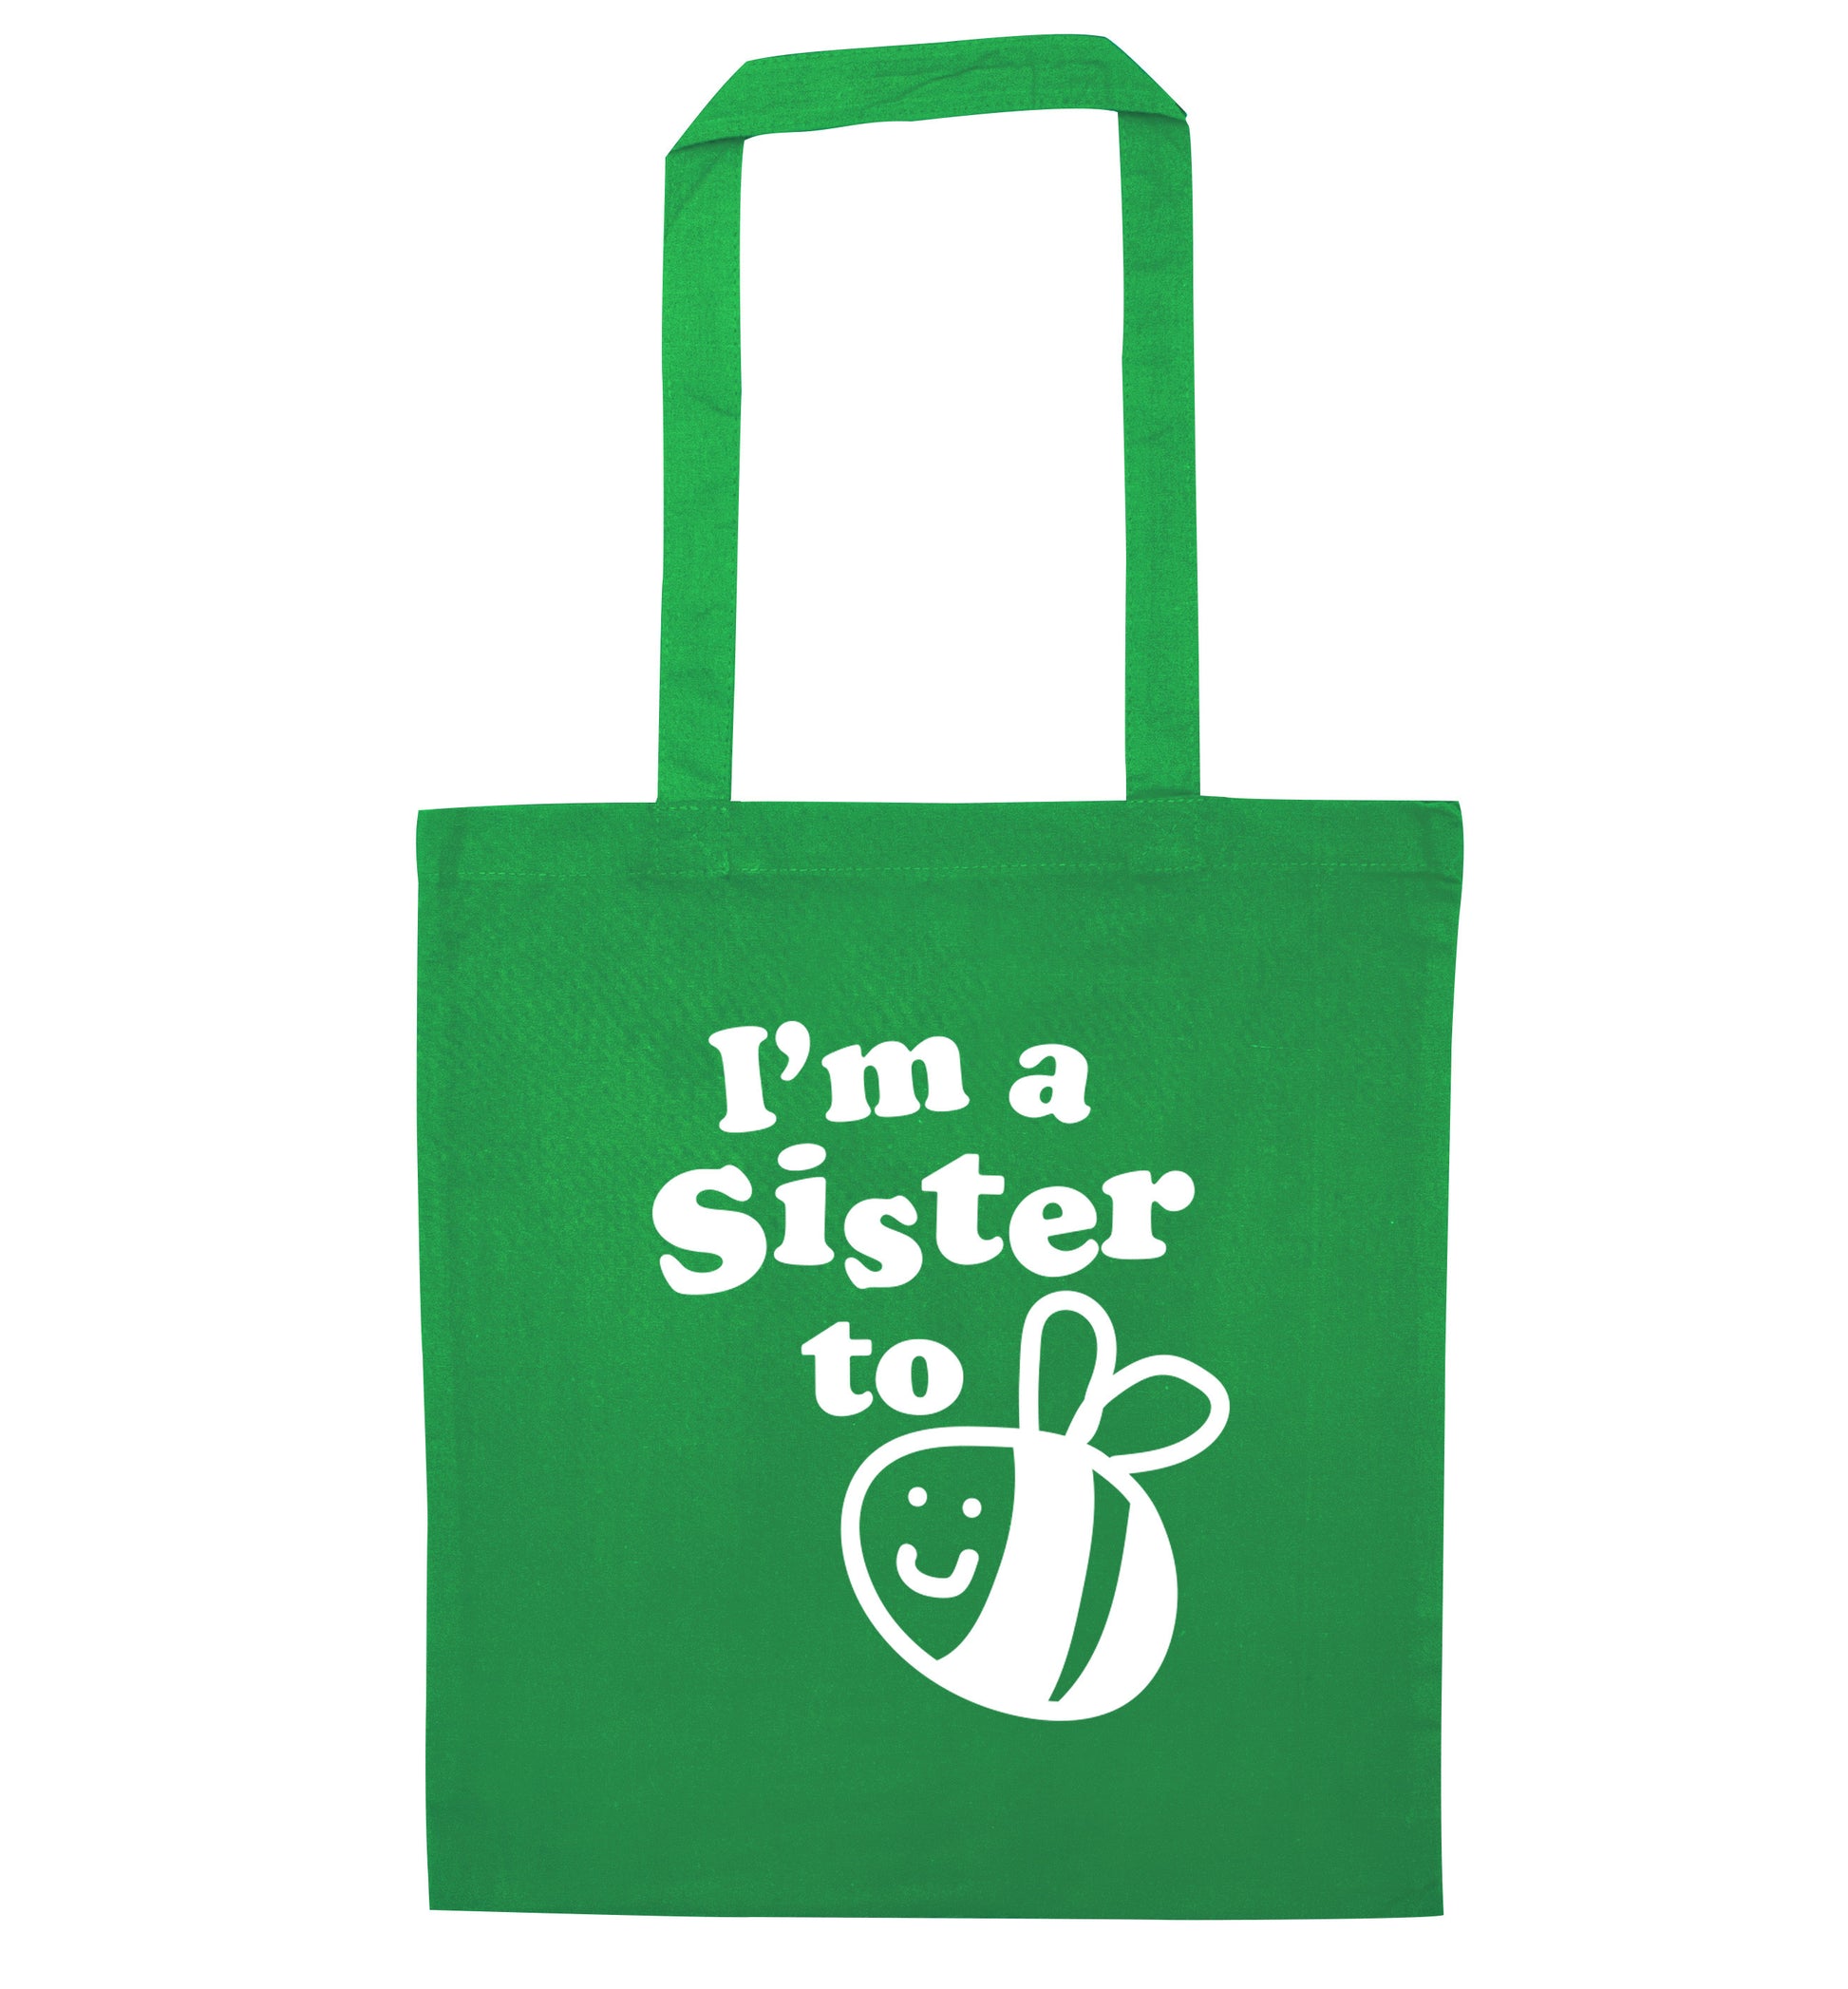 I'm a sister to be green tote bag